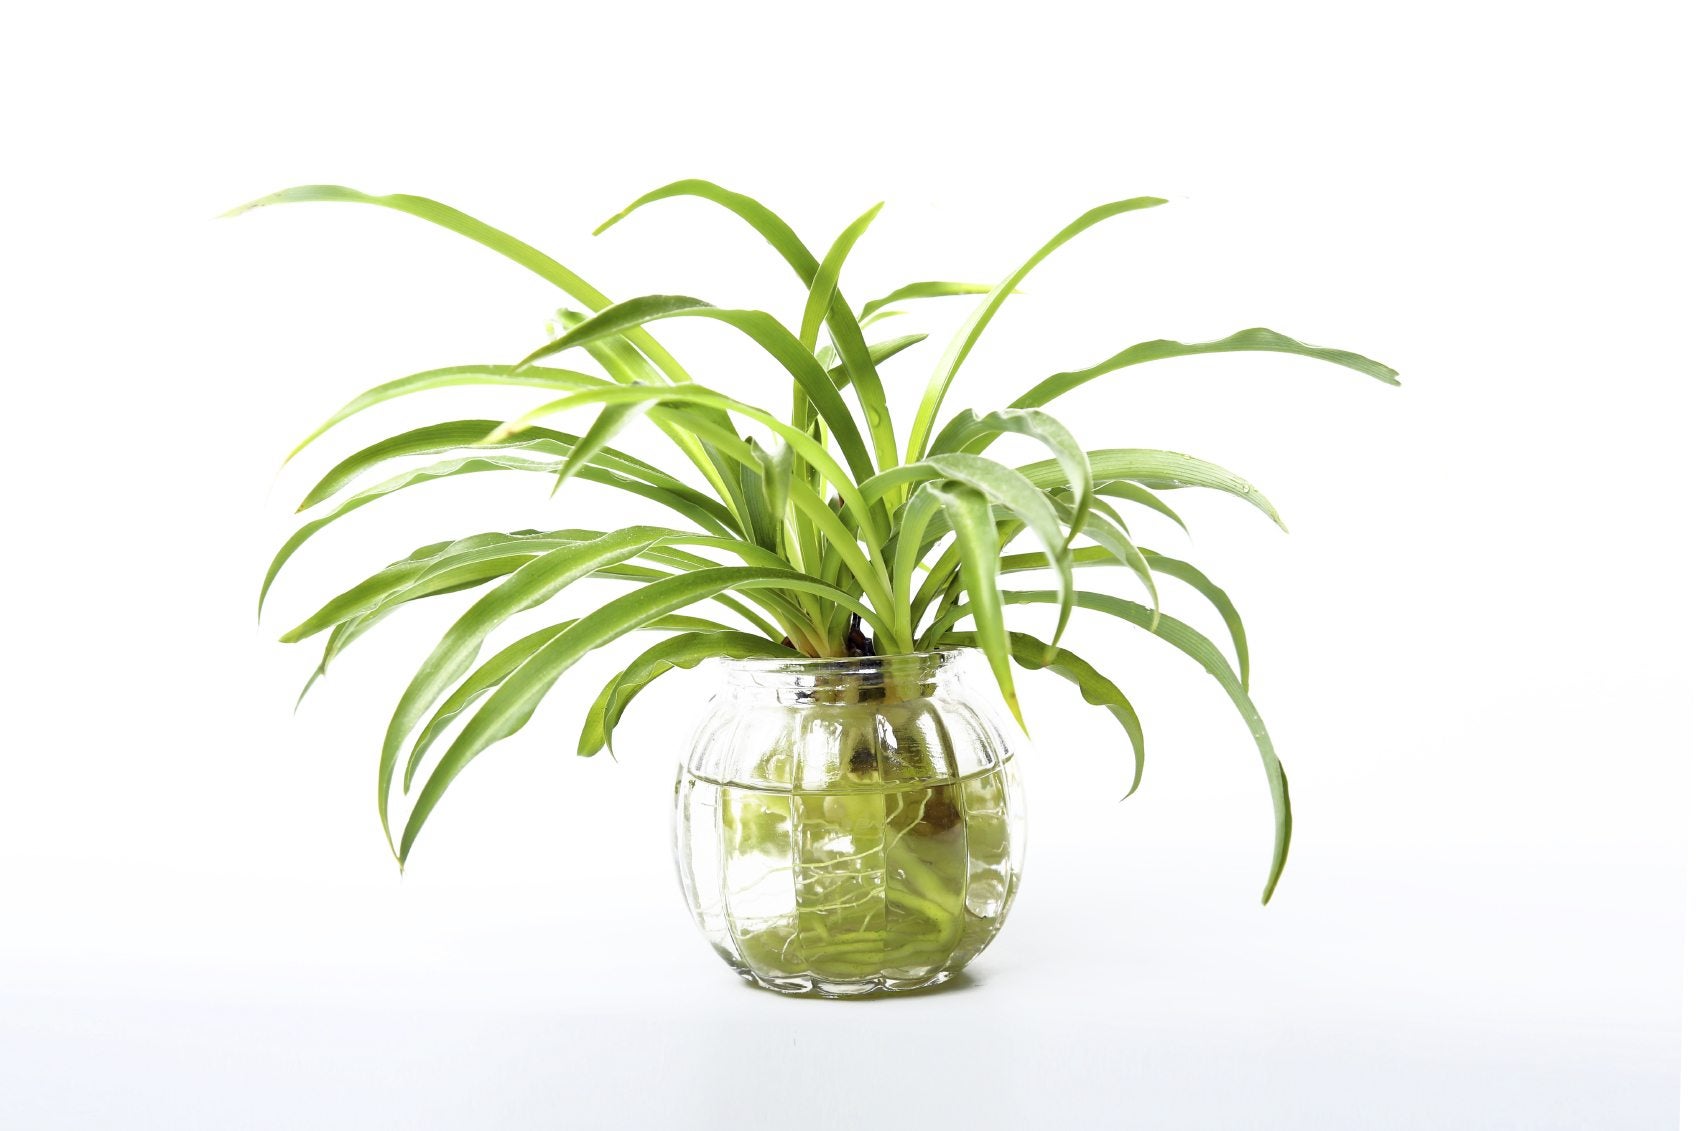 Spider Plant Germination - Tips On Growing Spider Plants From Seed